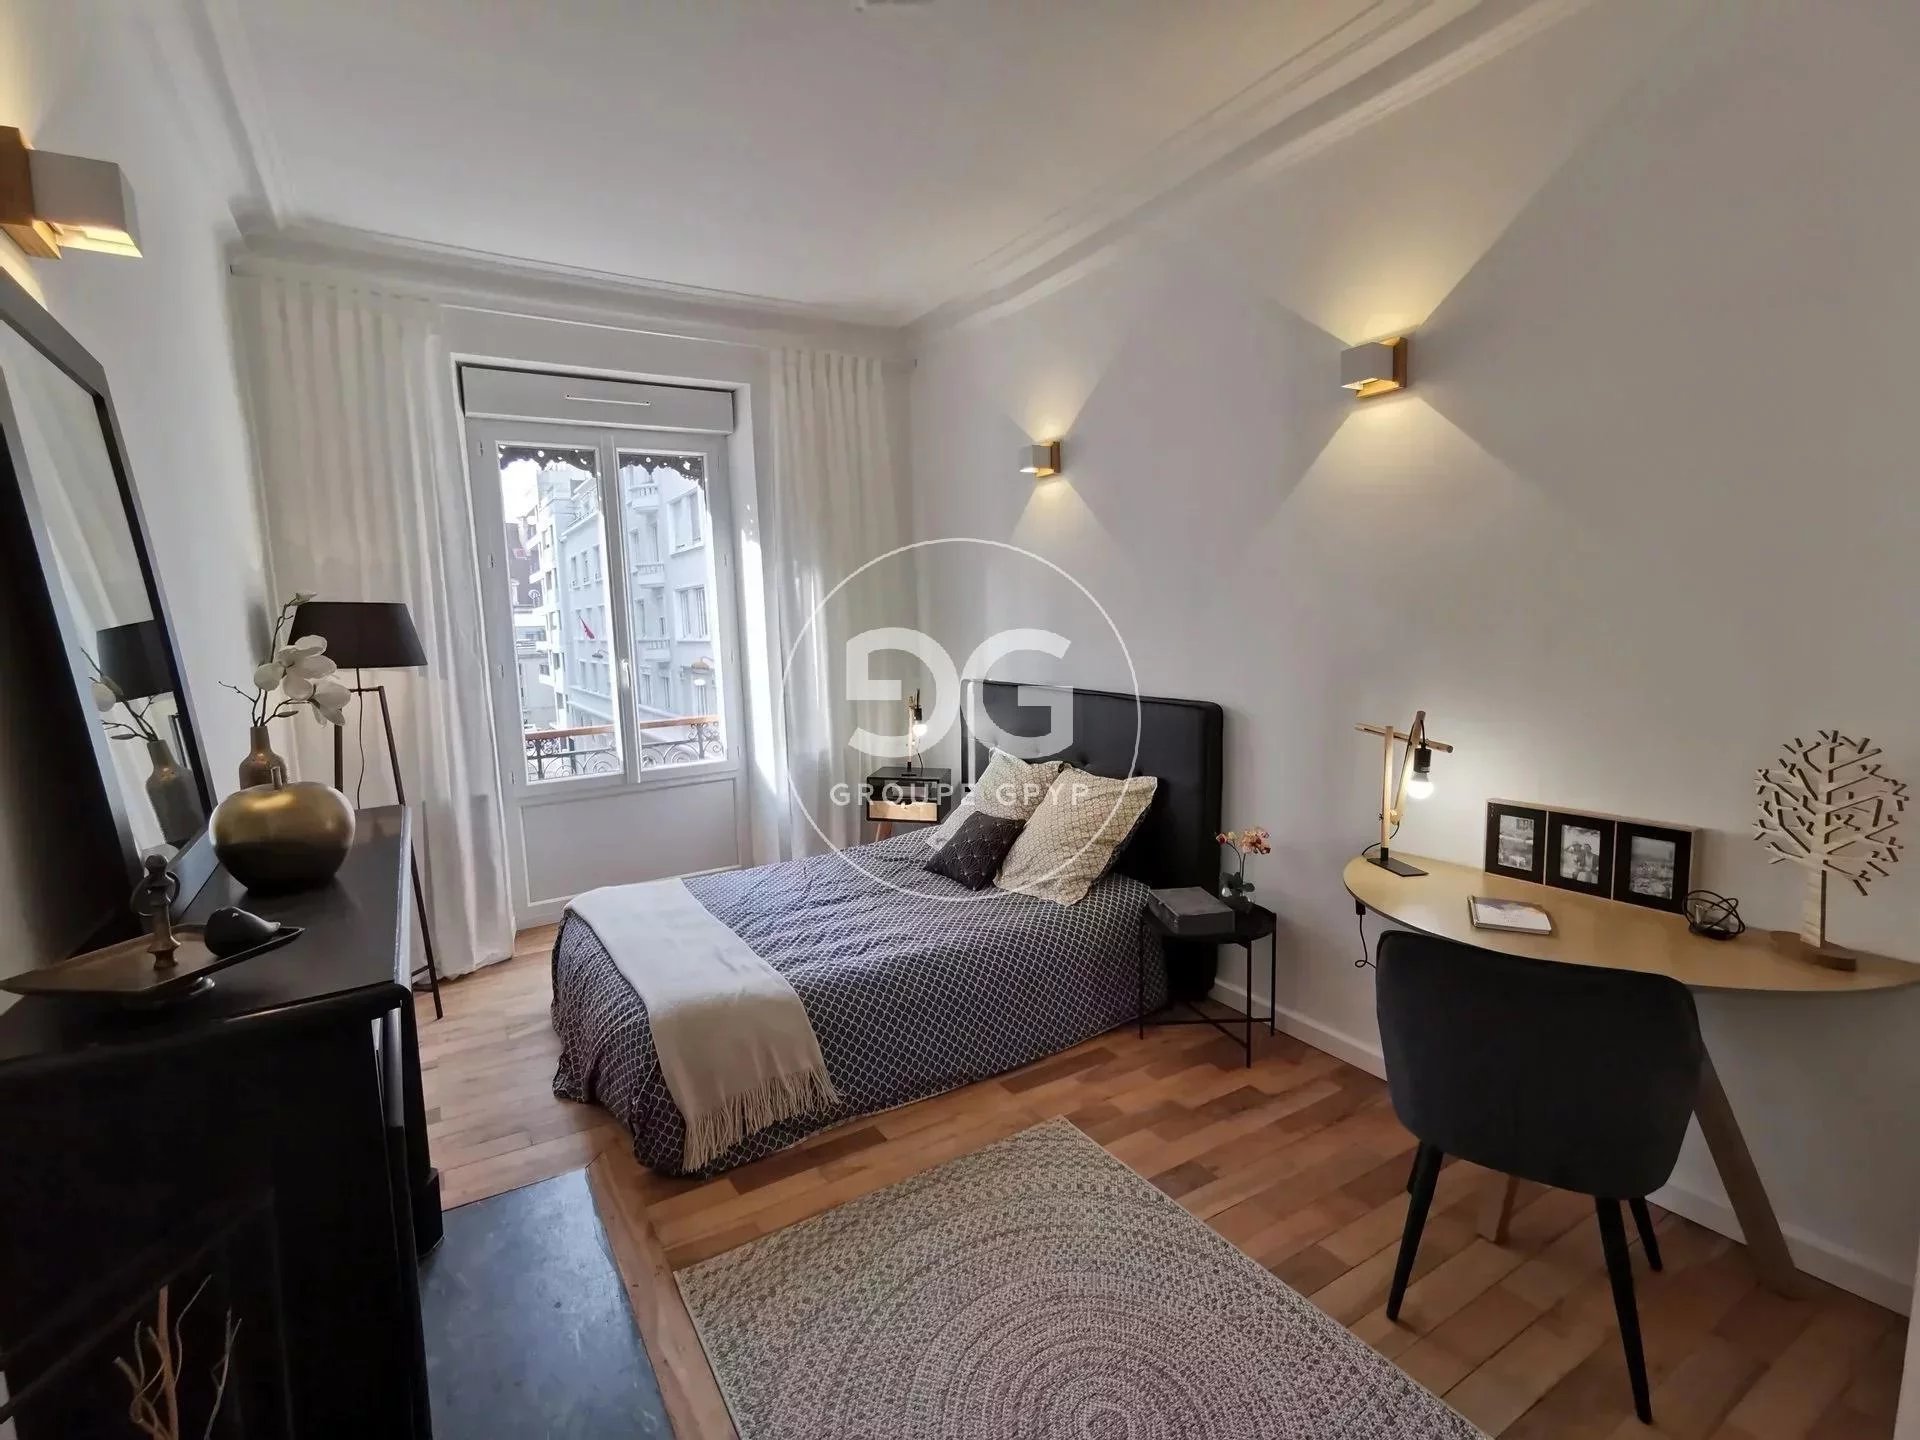 Large 61,97m², one bedroom apartment in central Grenoble